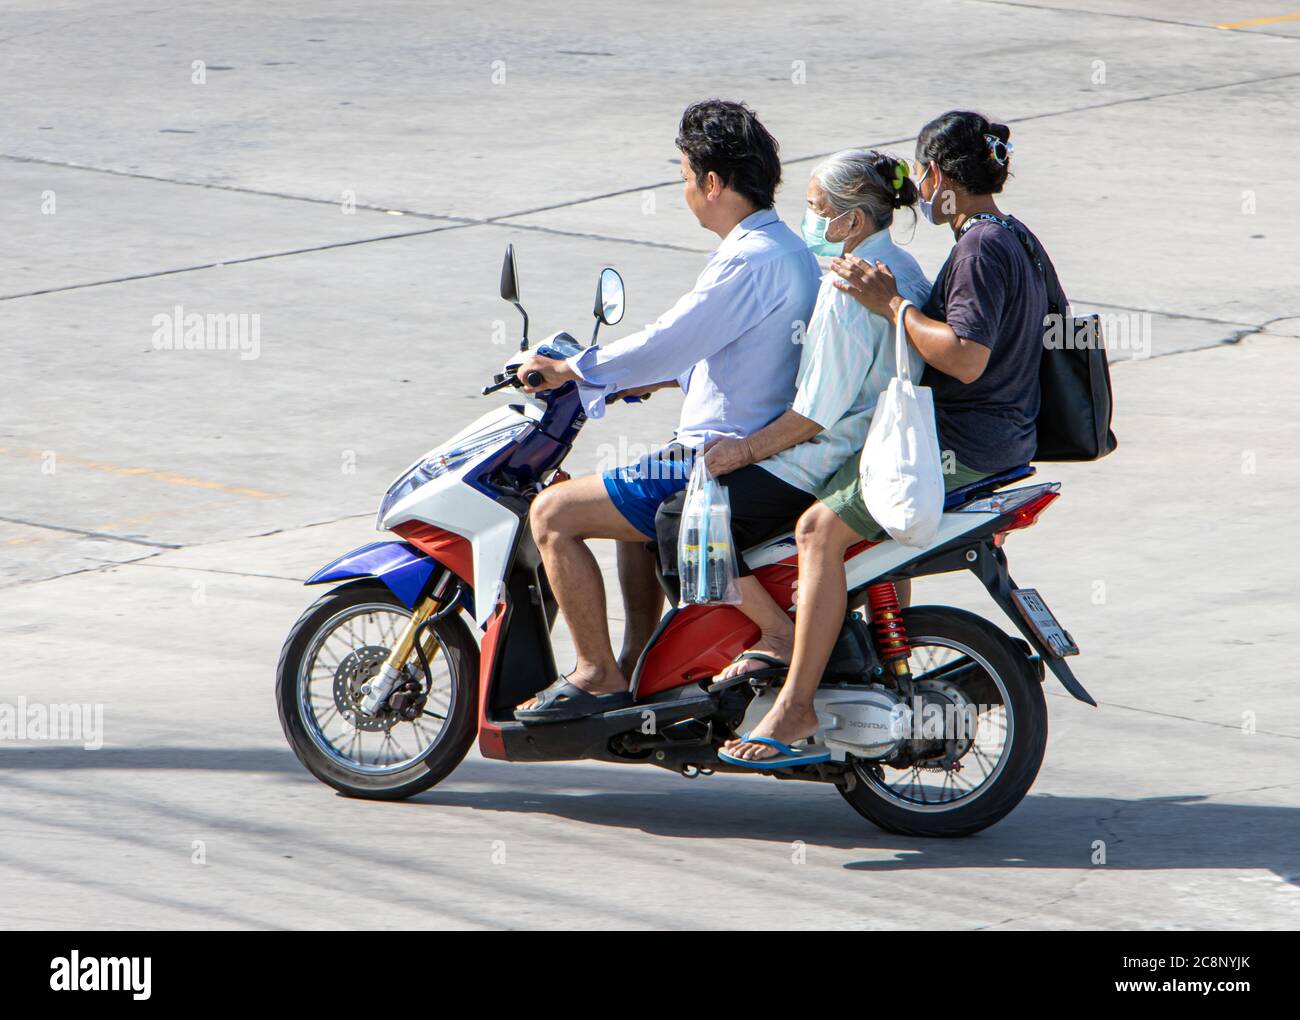 SAMUT PRAKAN, THAILAND, JUL 01 2020, A group of people riding a motorcycle on a street. Stock Photo